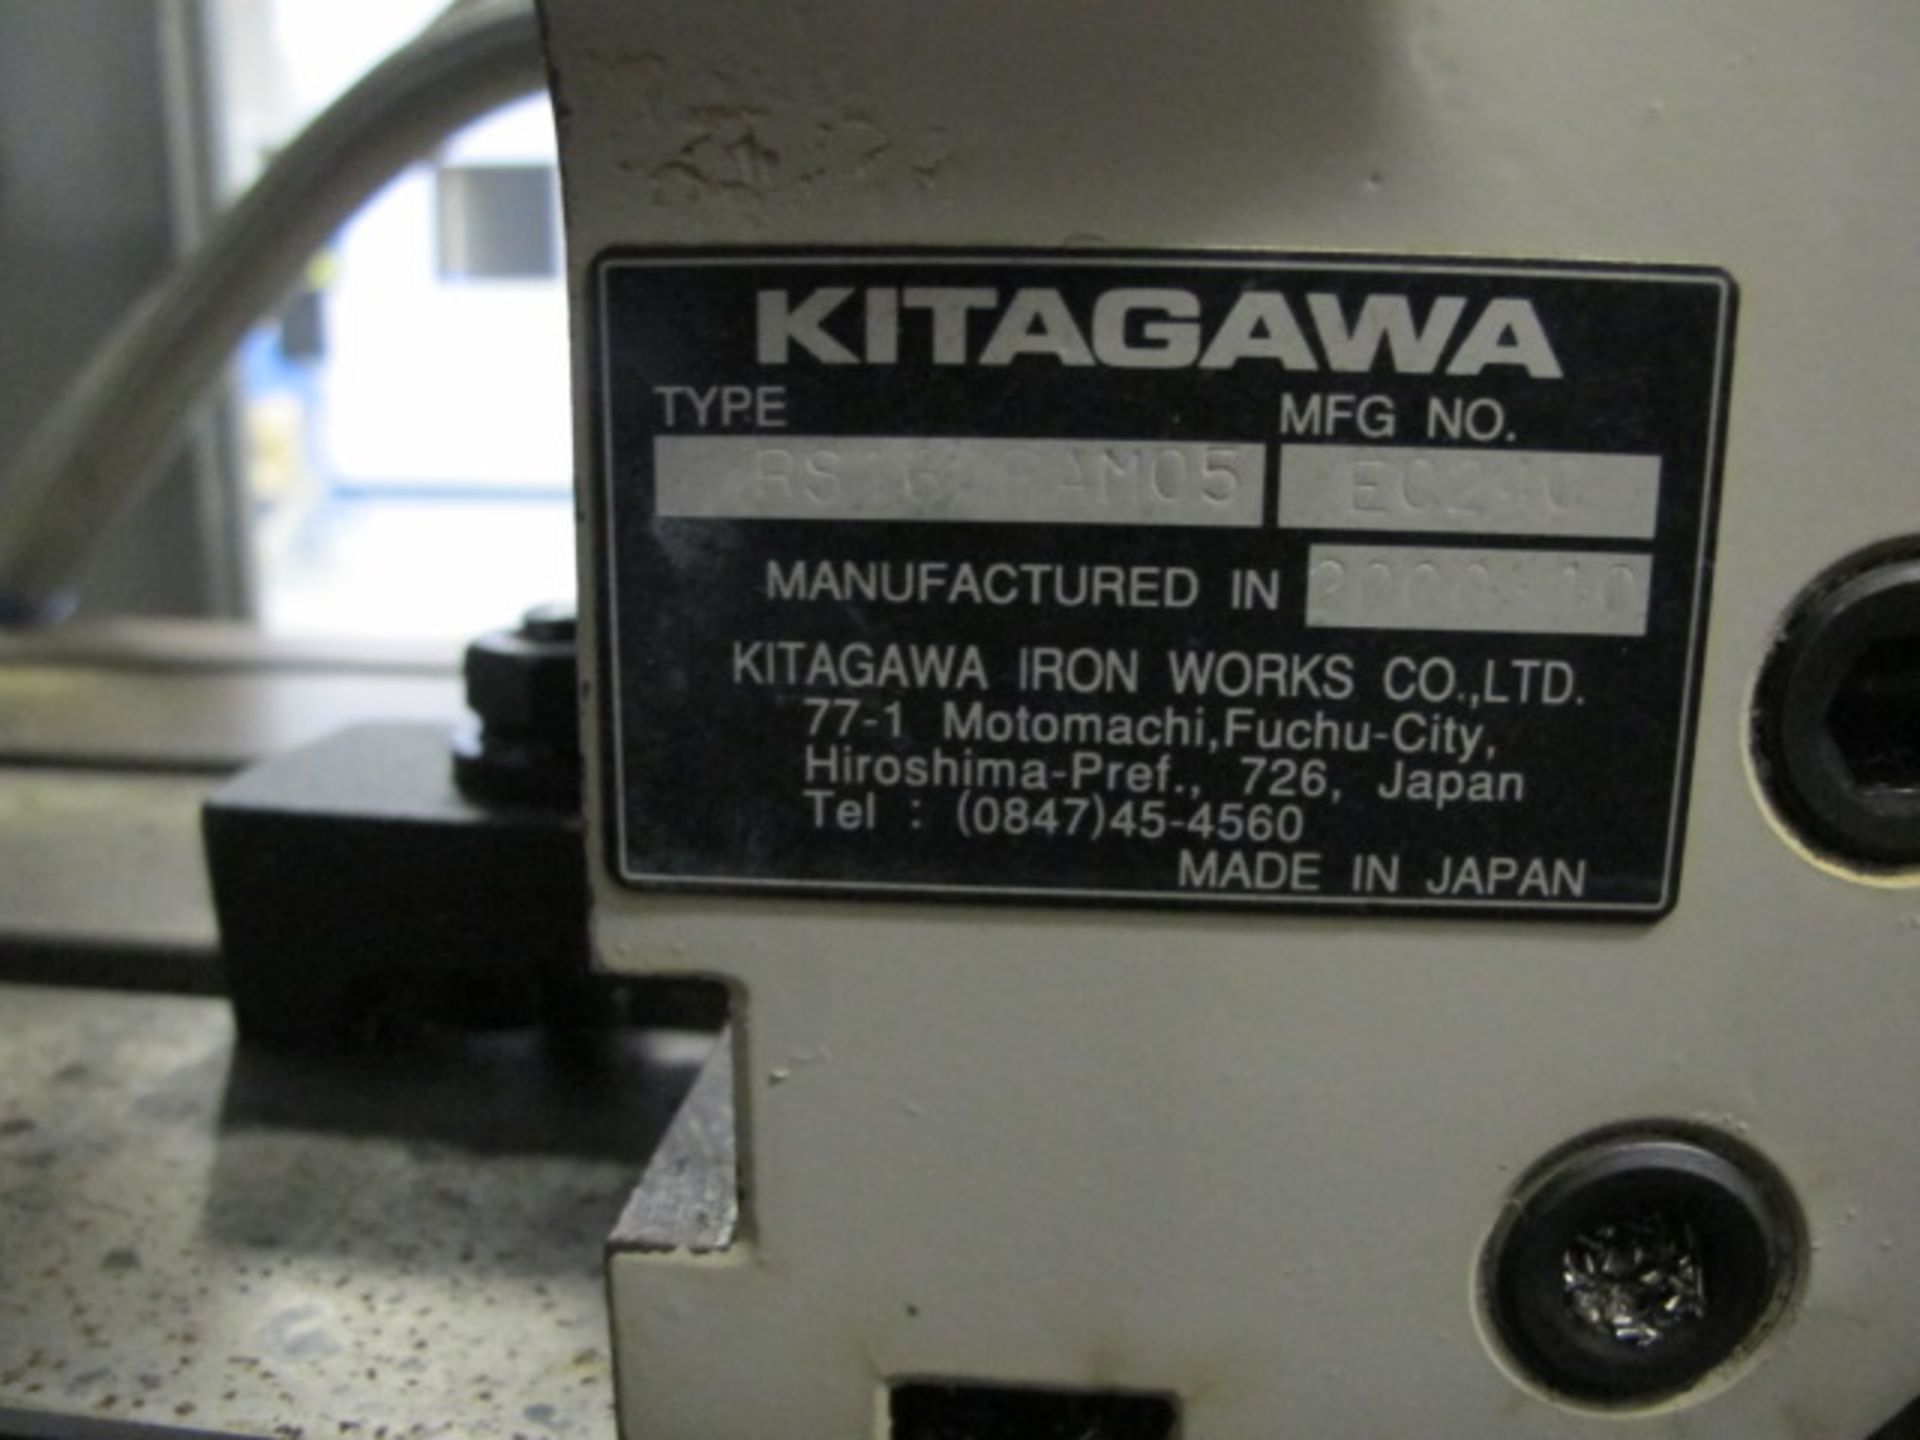 Kitagawa RS-160 RAM05 6” 4th Axis Rotary Head w/ 5C Collet Closer Attachment - Image 4 of 4